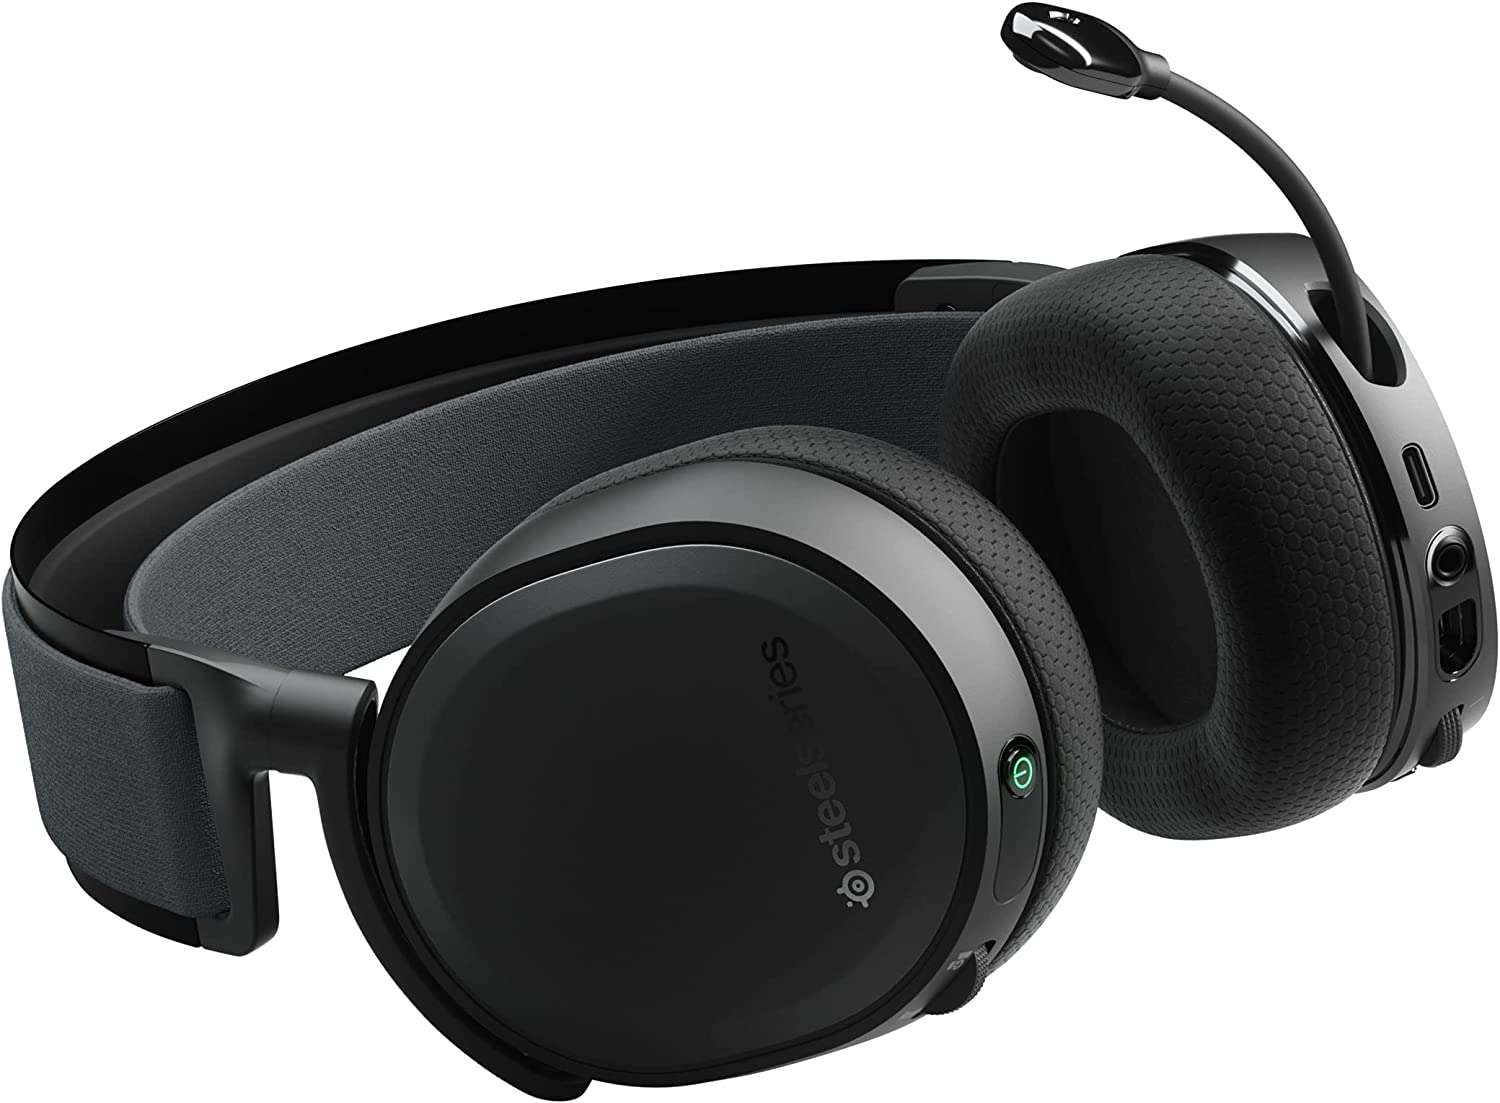 steelseries-arctis-7-cuffie-gaming-wireless-sogno-microfono